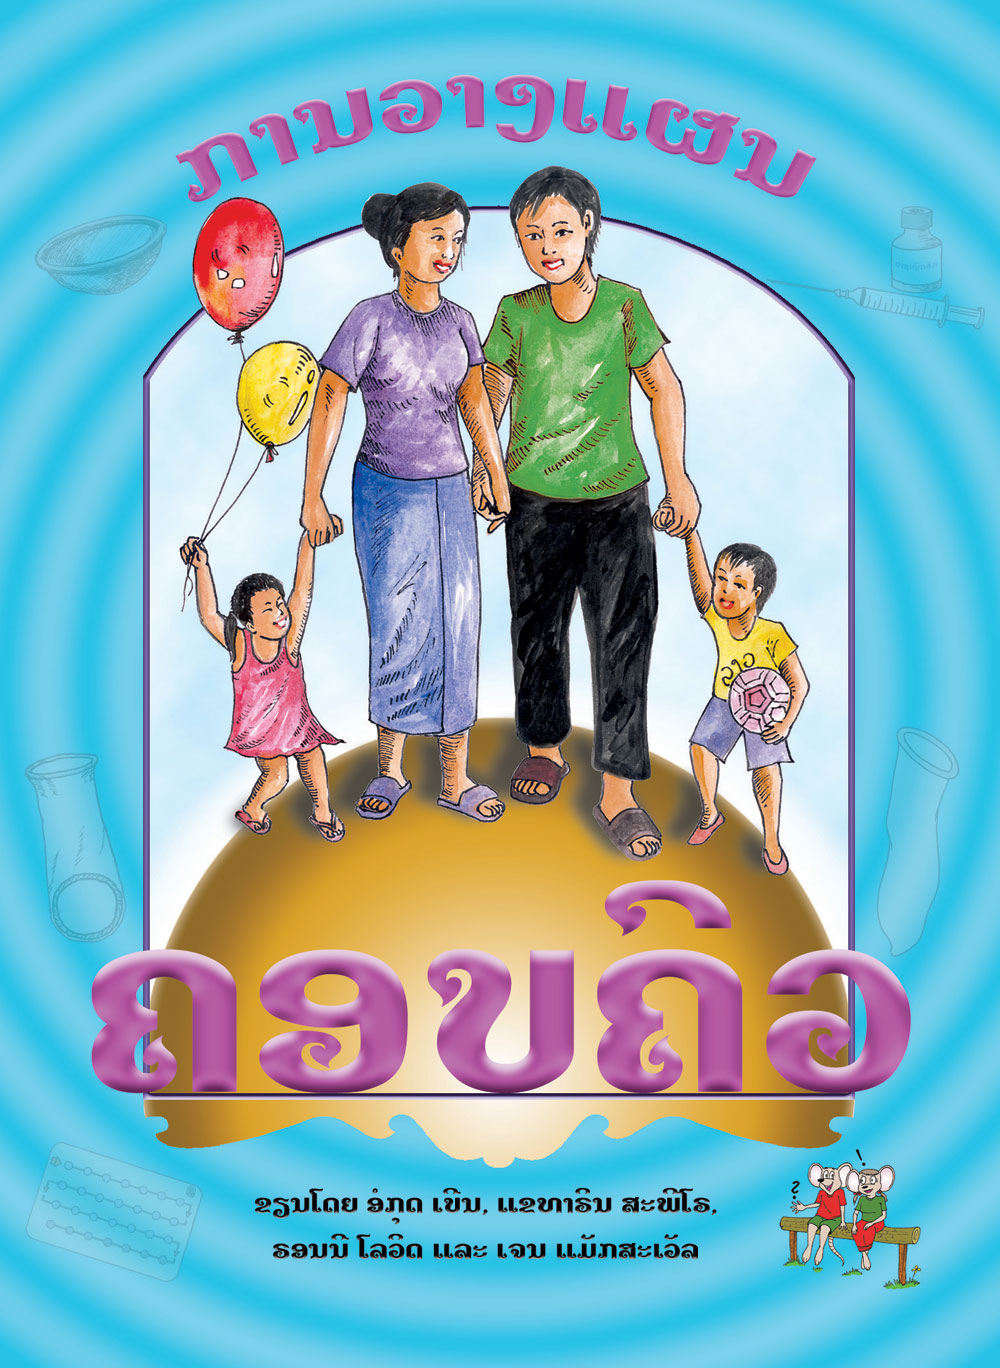 Family Planning large book cover, published in 